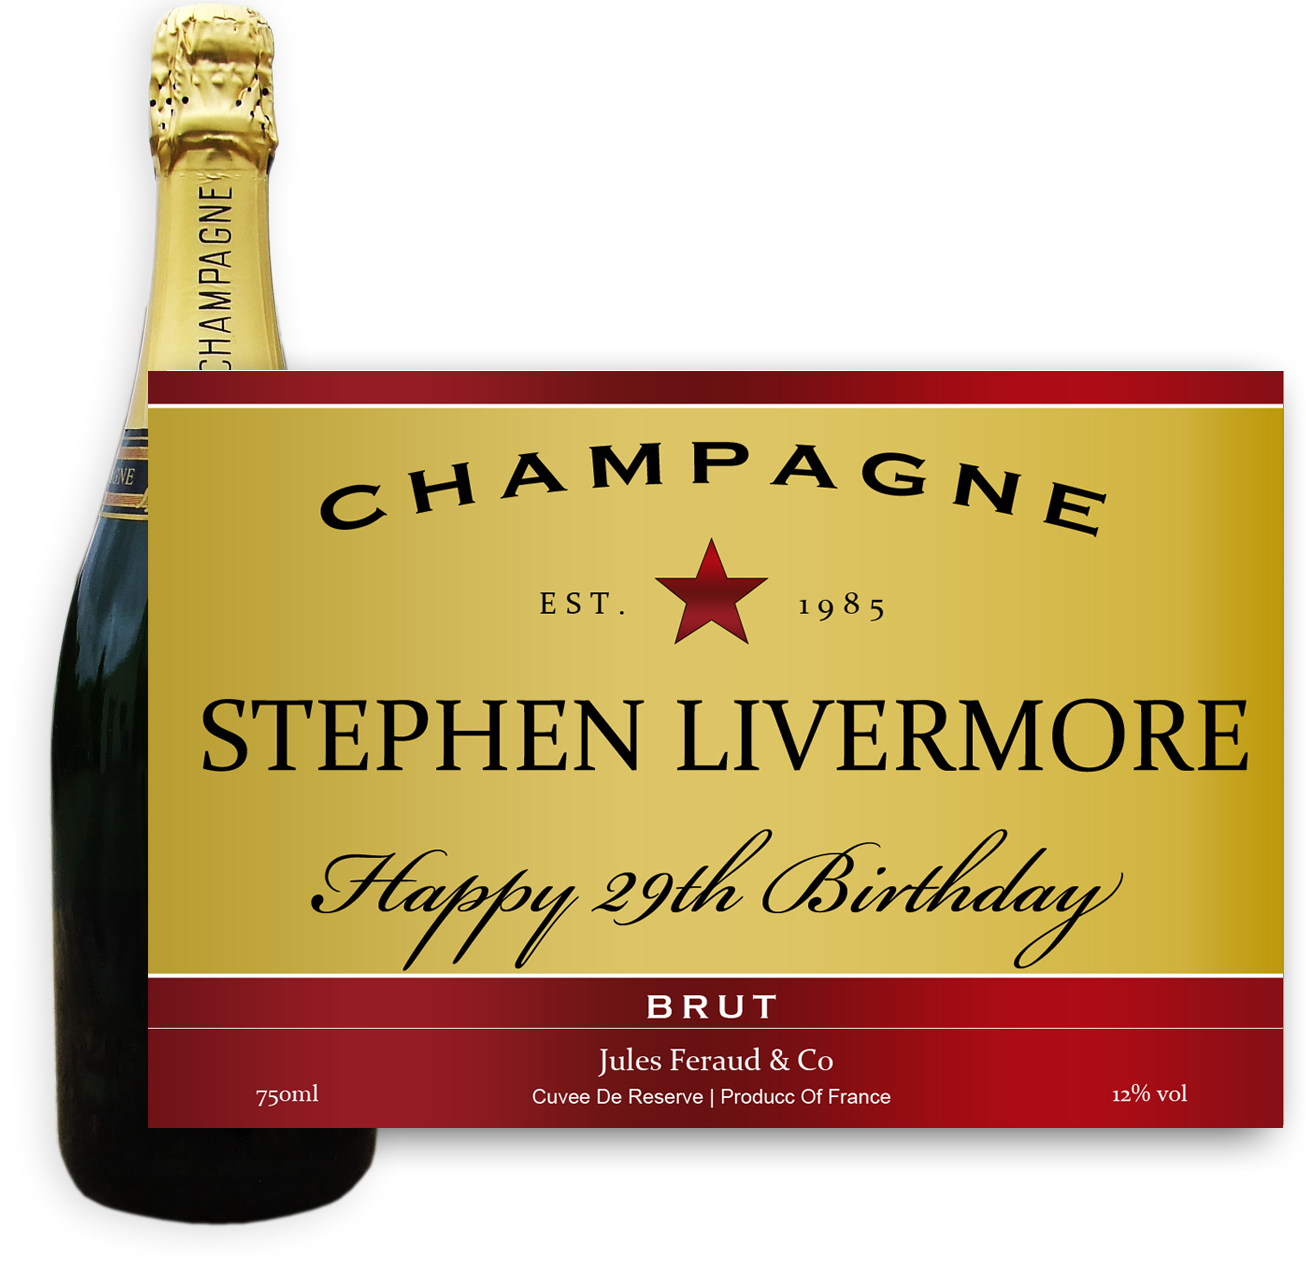 Buy & Send Personalised Champagne - Jules Feraud, Brut- Red and Gold Label Gift Online